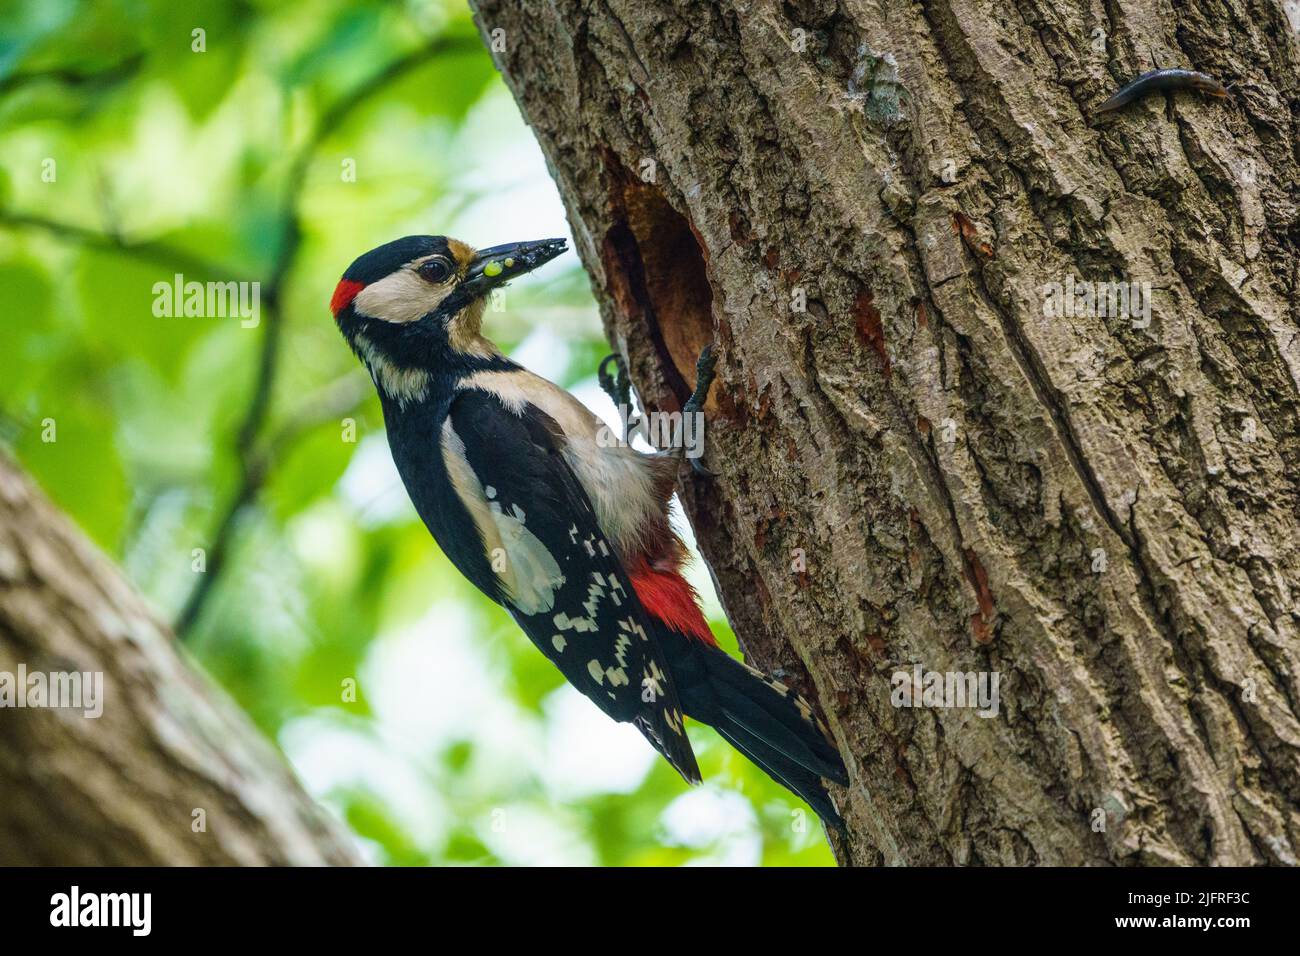 Great spotted woodpecker, Dendrocopos major at his nest feeding his chicks, Gnesta, Sweden Stock Photo